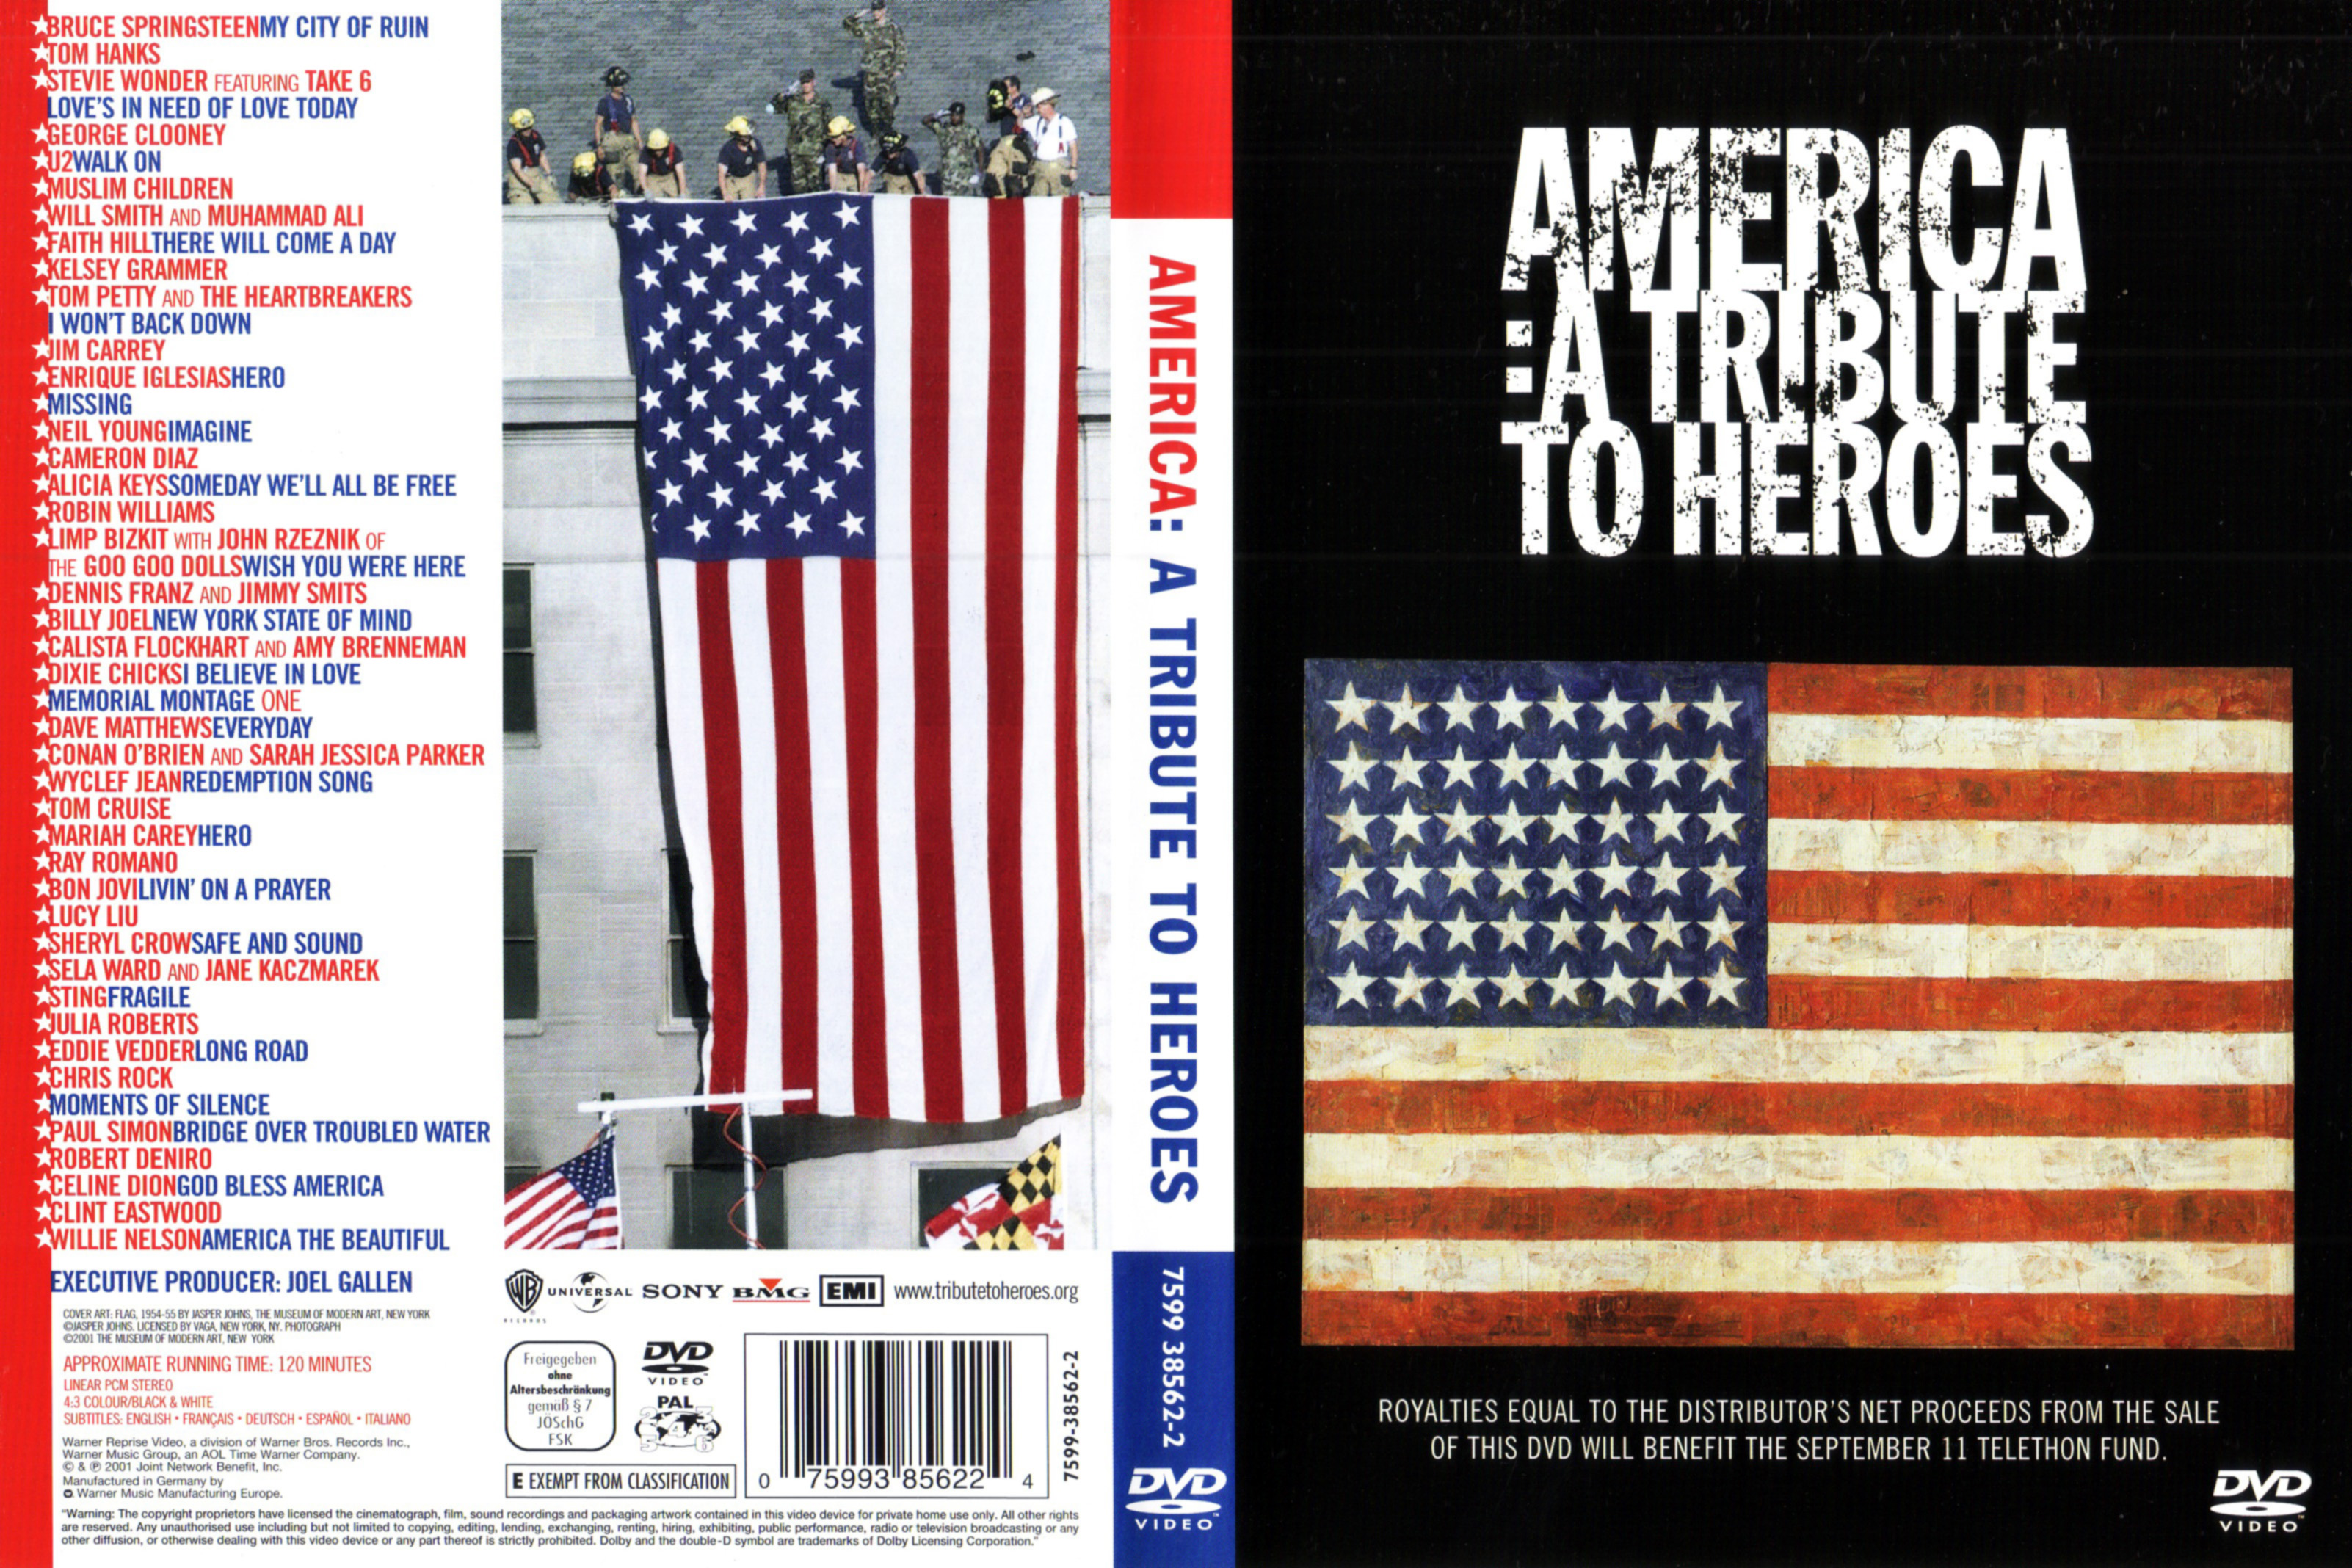 Jaquette DVD America - A tribute to heroes